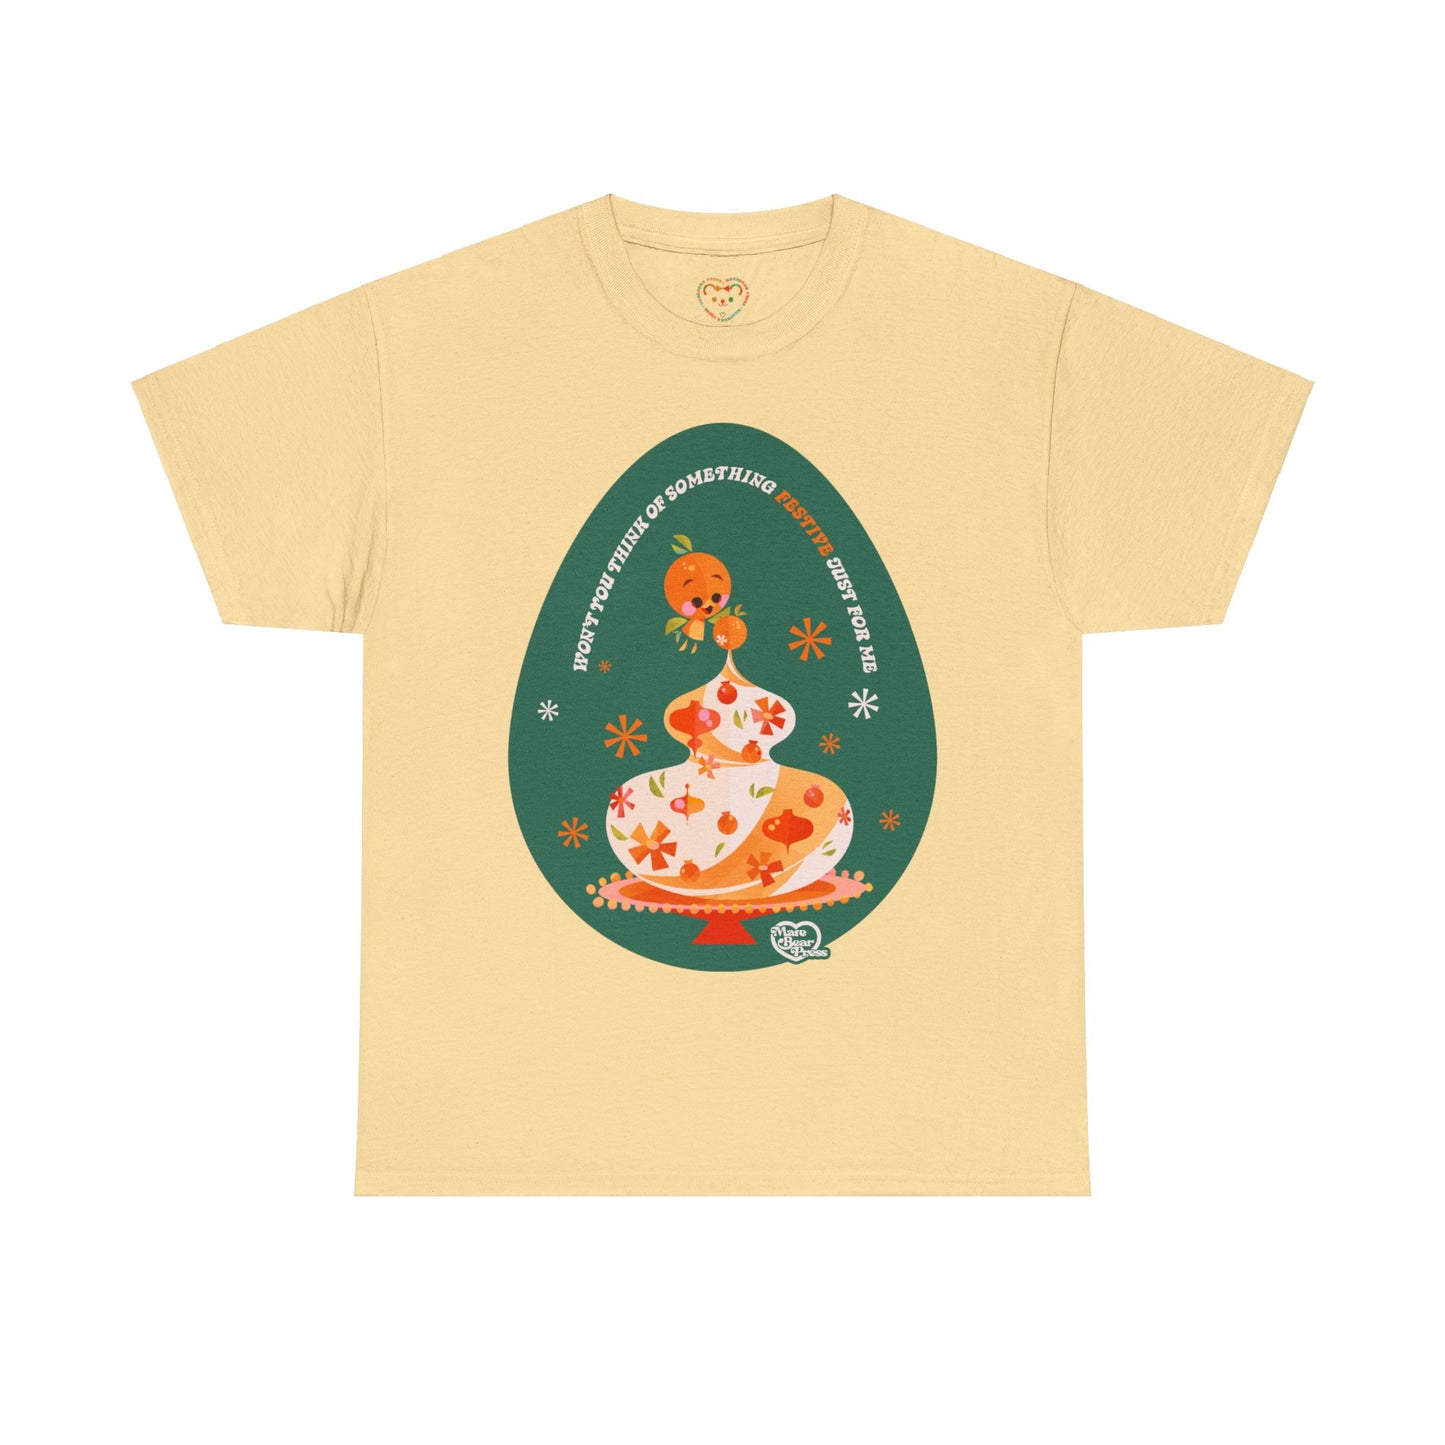 Festive Thoughts Tee